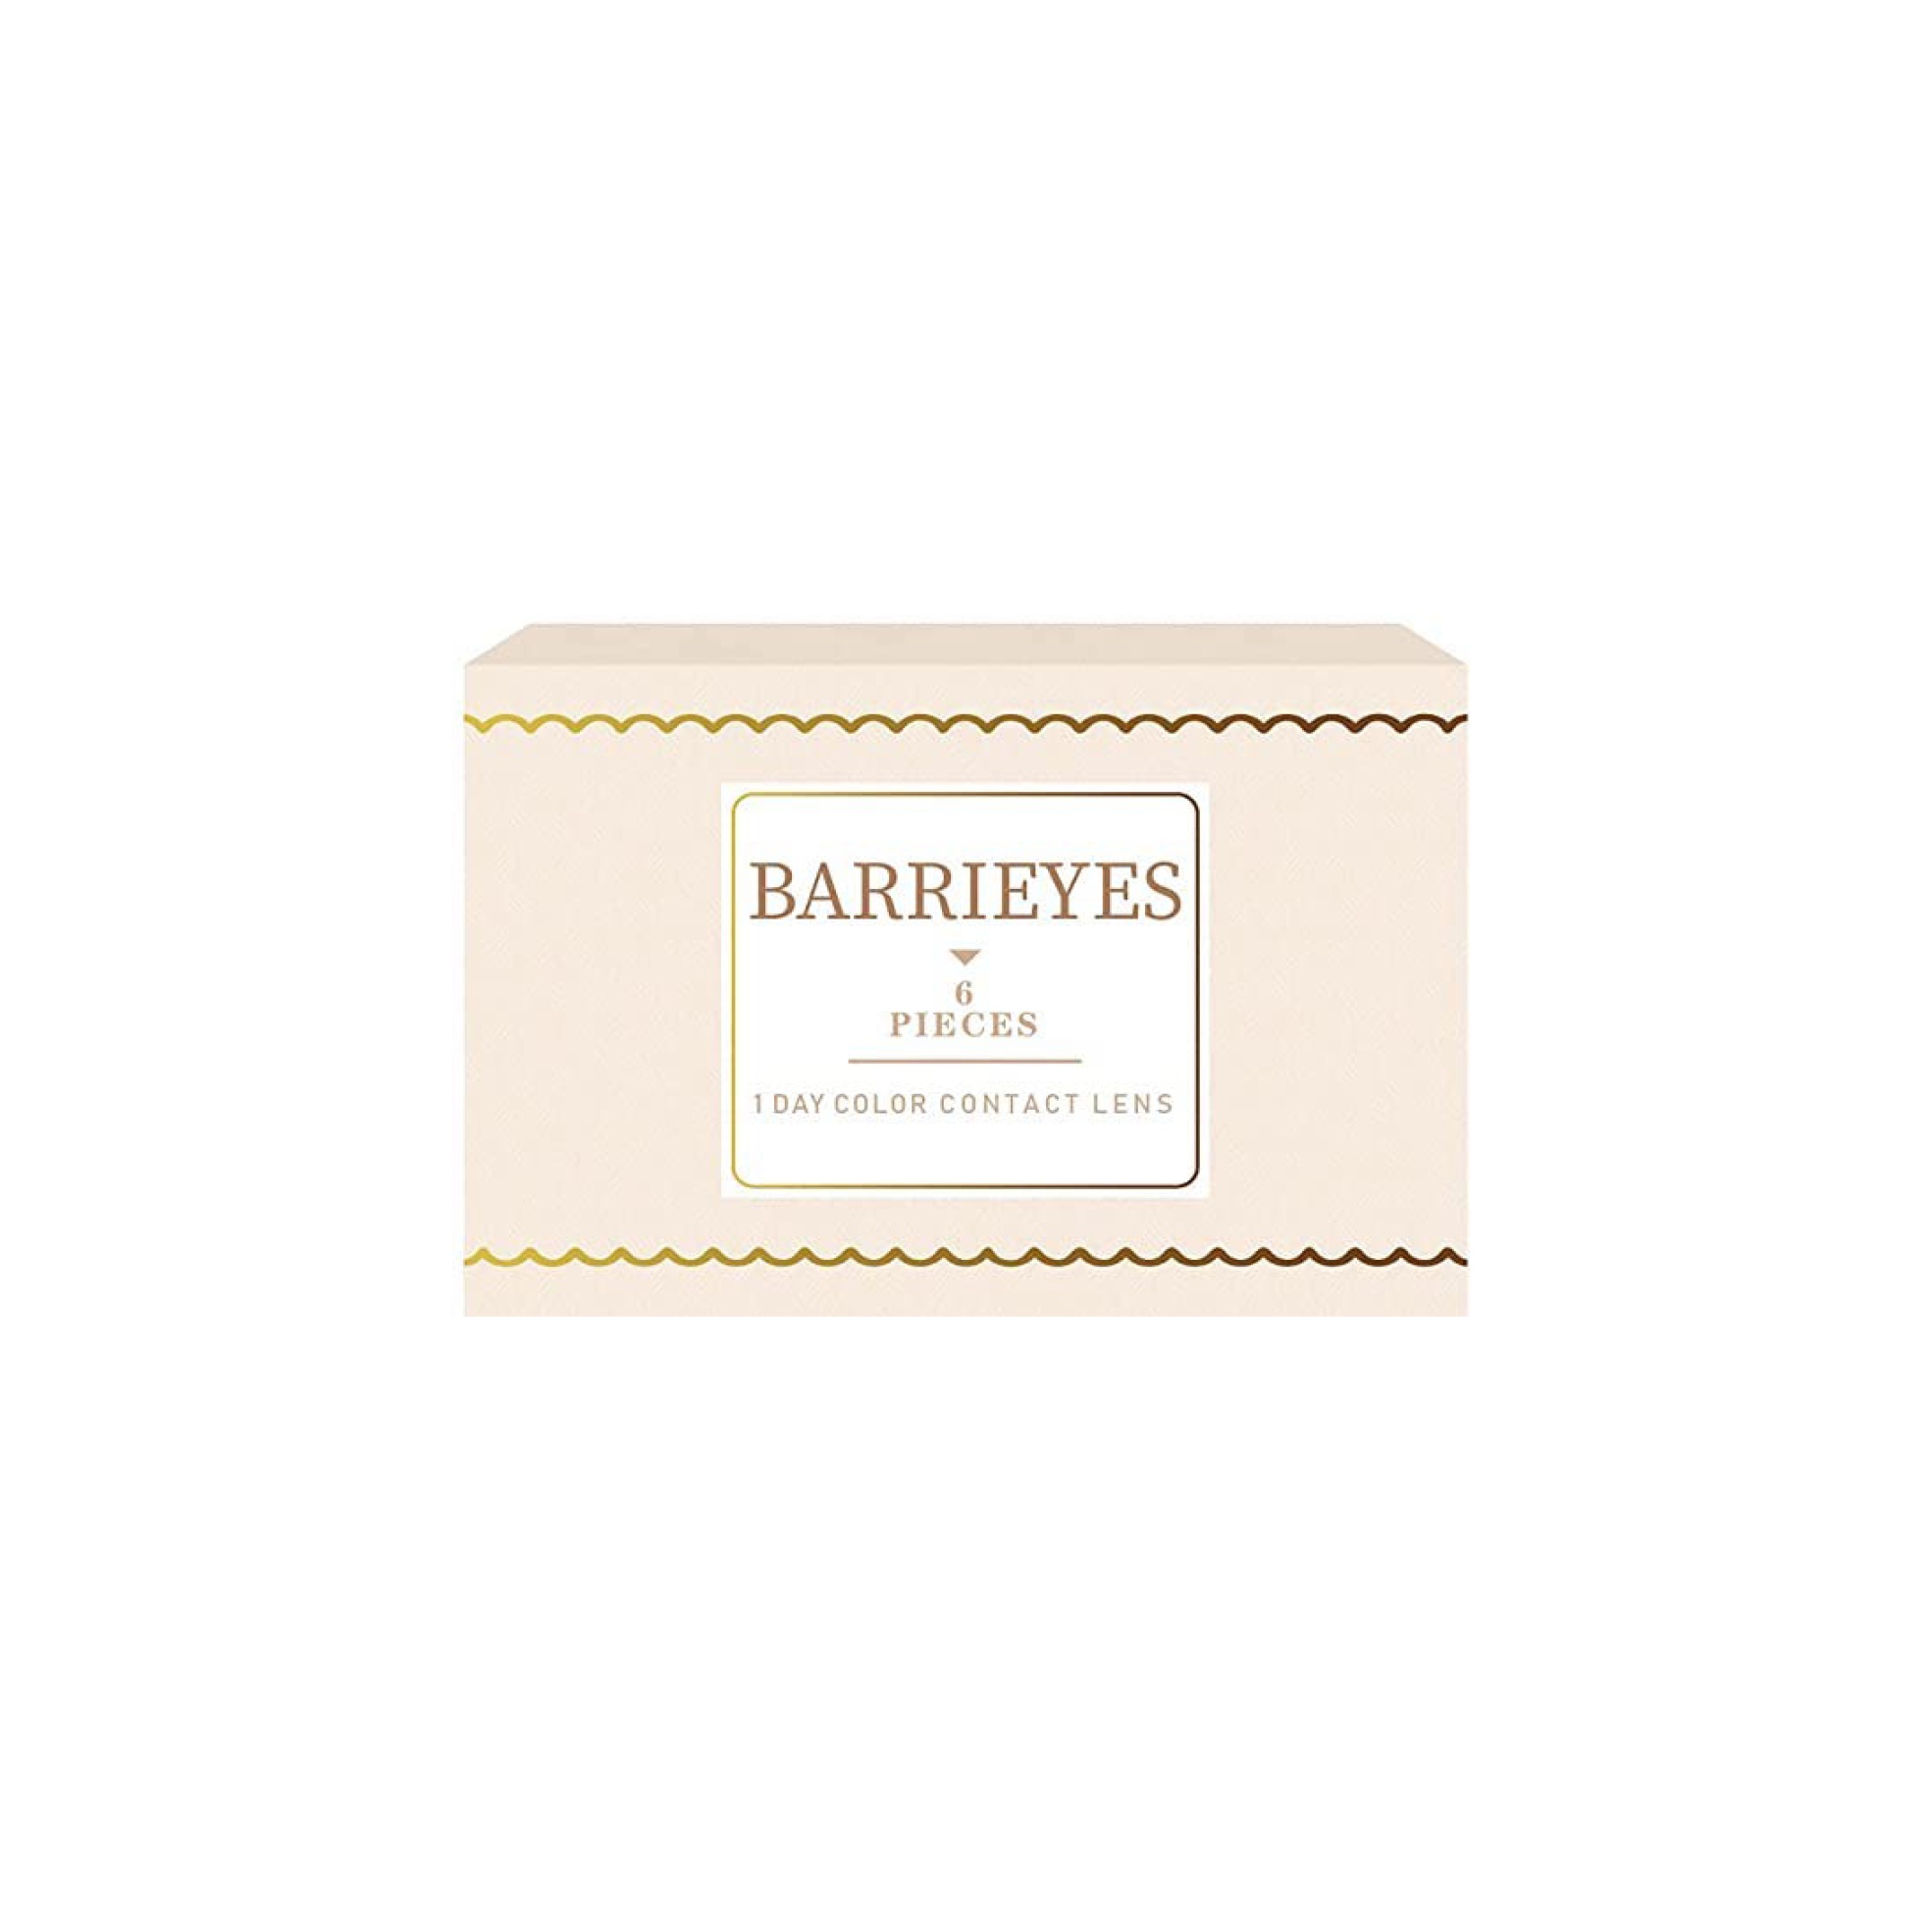 Barrieyes 1-Day color contact lens #Iris beige日抛美瞳米黄棕｜6 Pcs